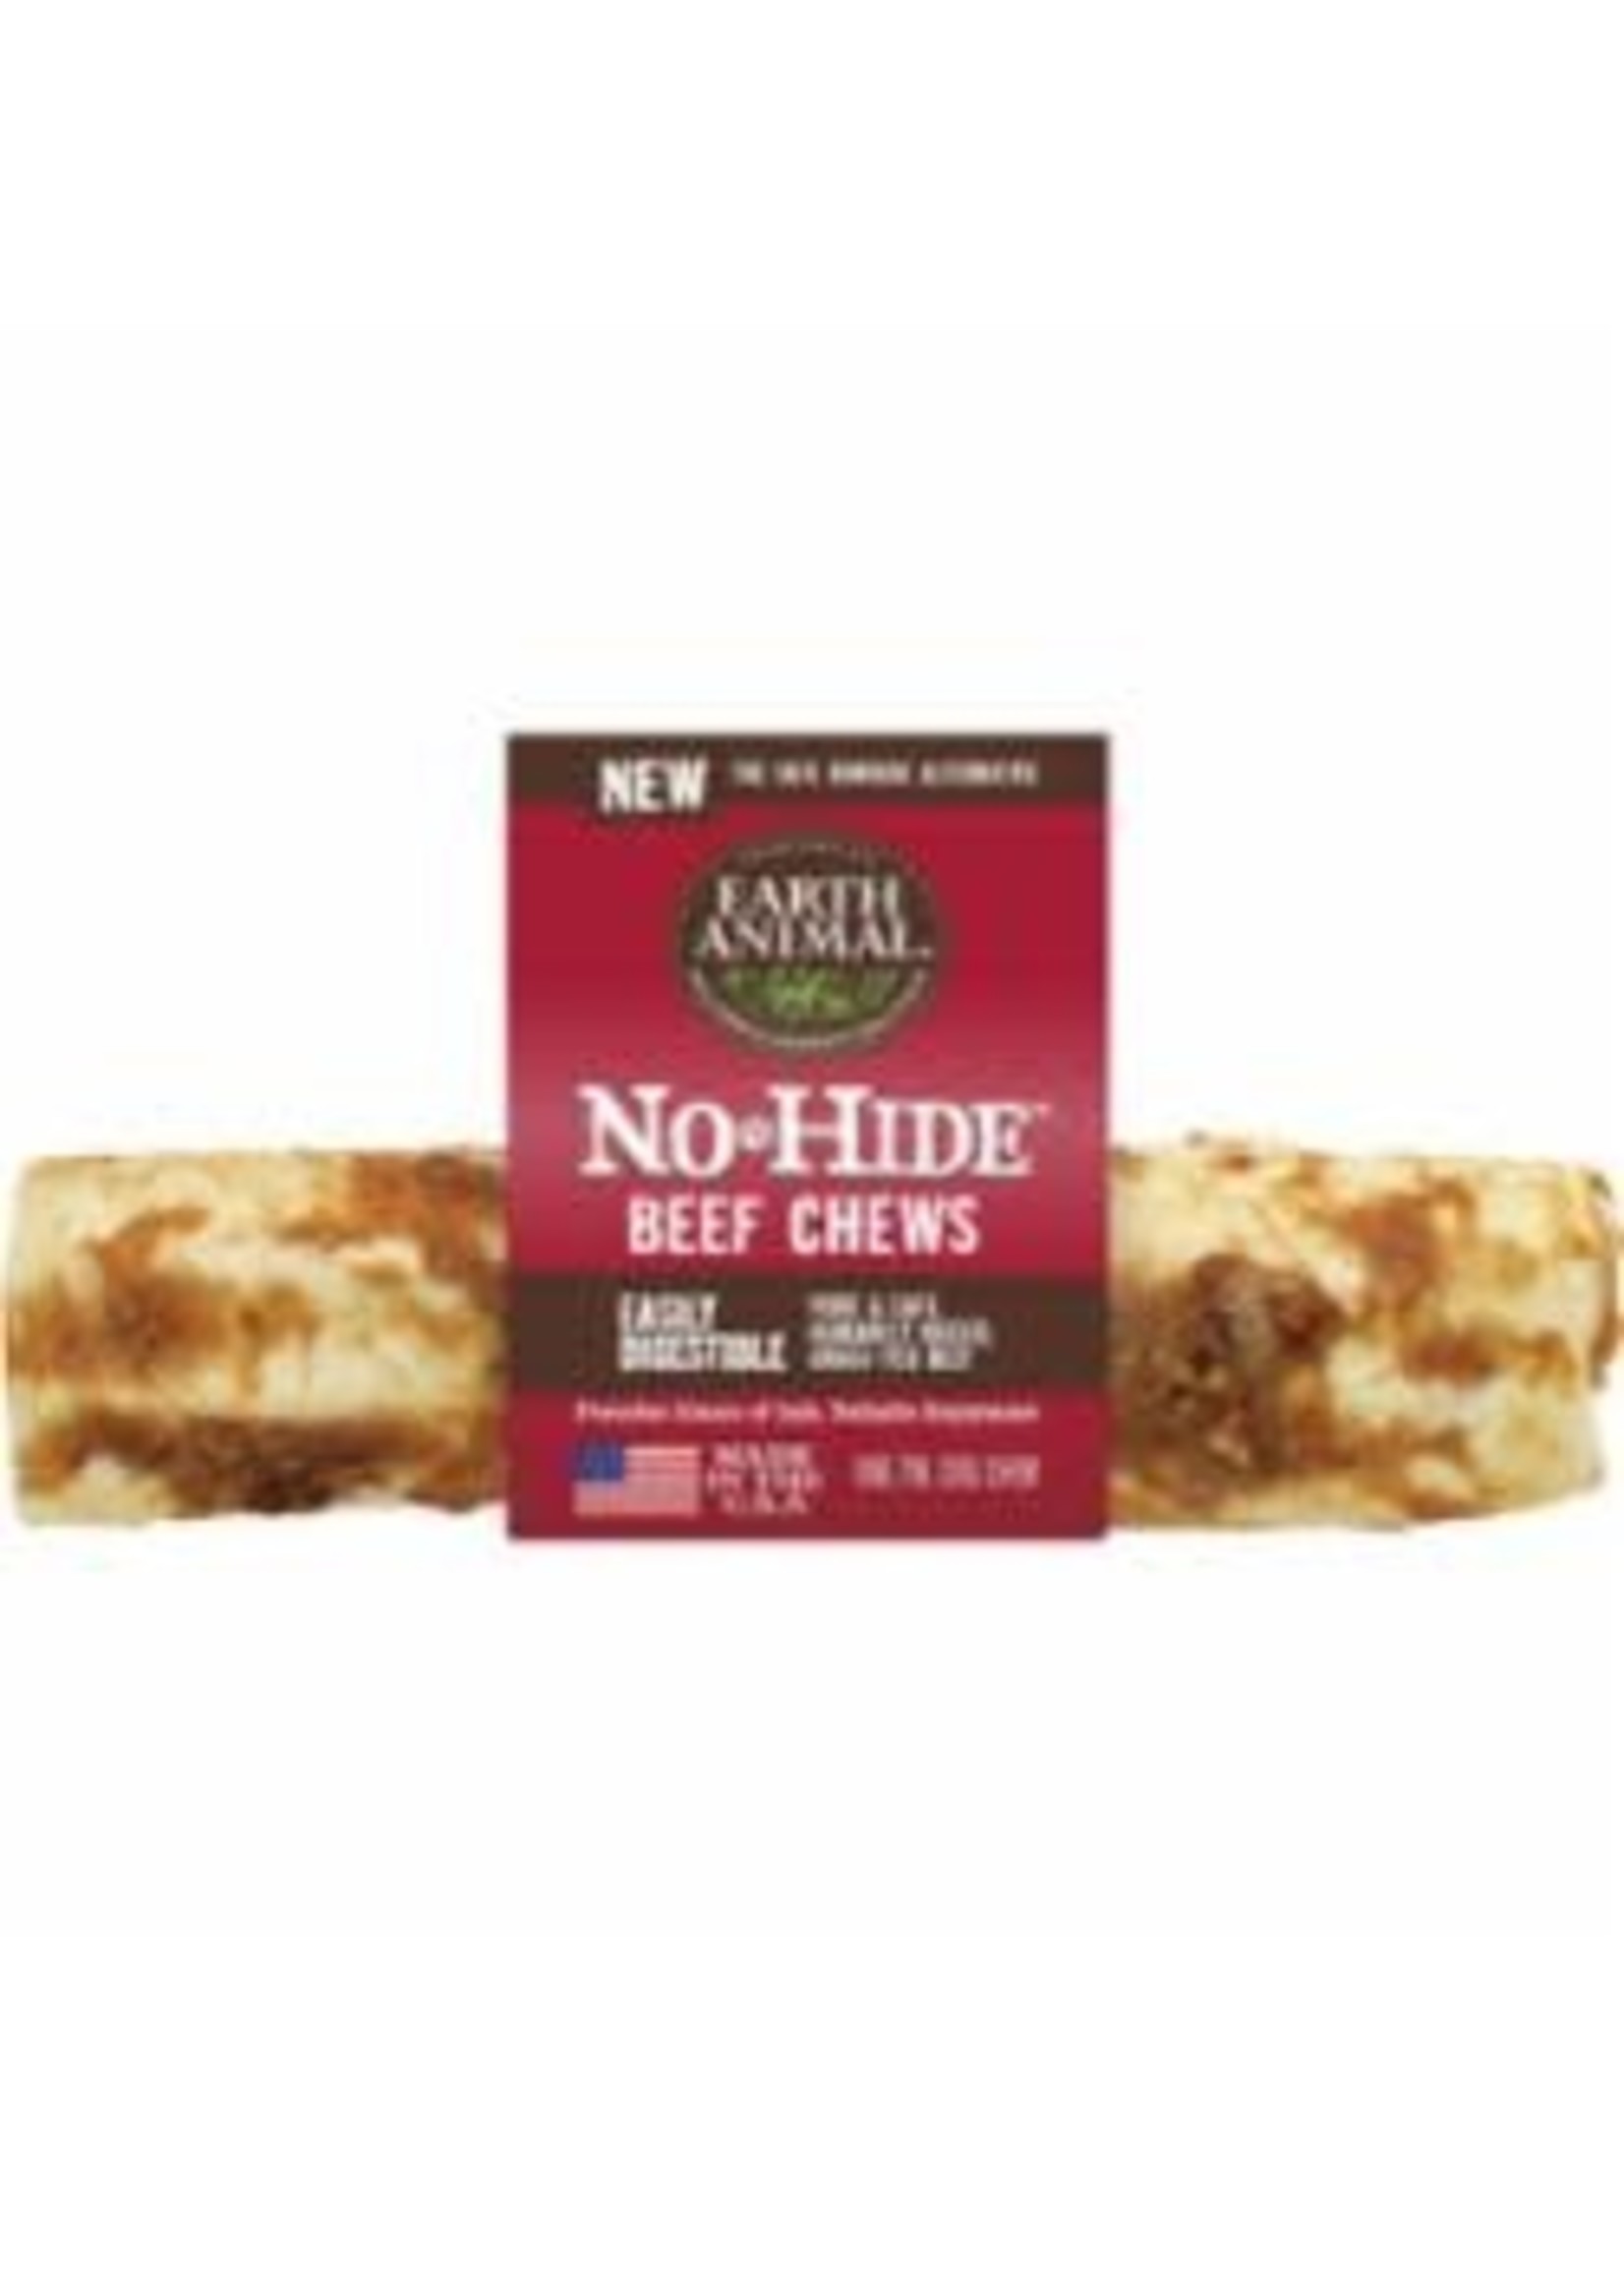 Earth Animal NO-HIDE BEEF CHEW - 7 INCHES